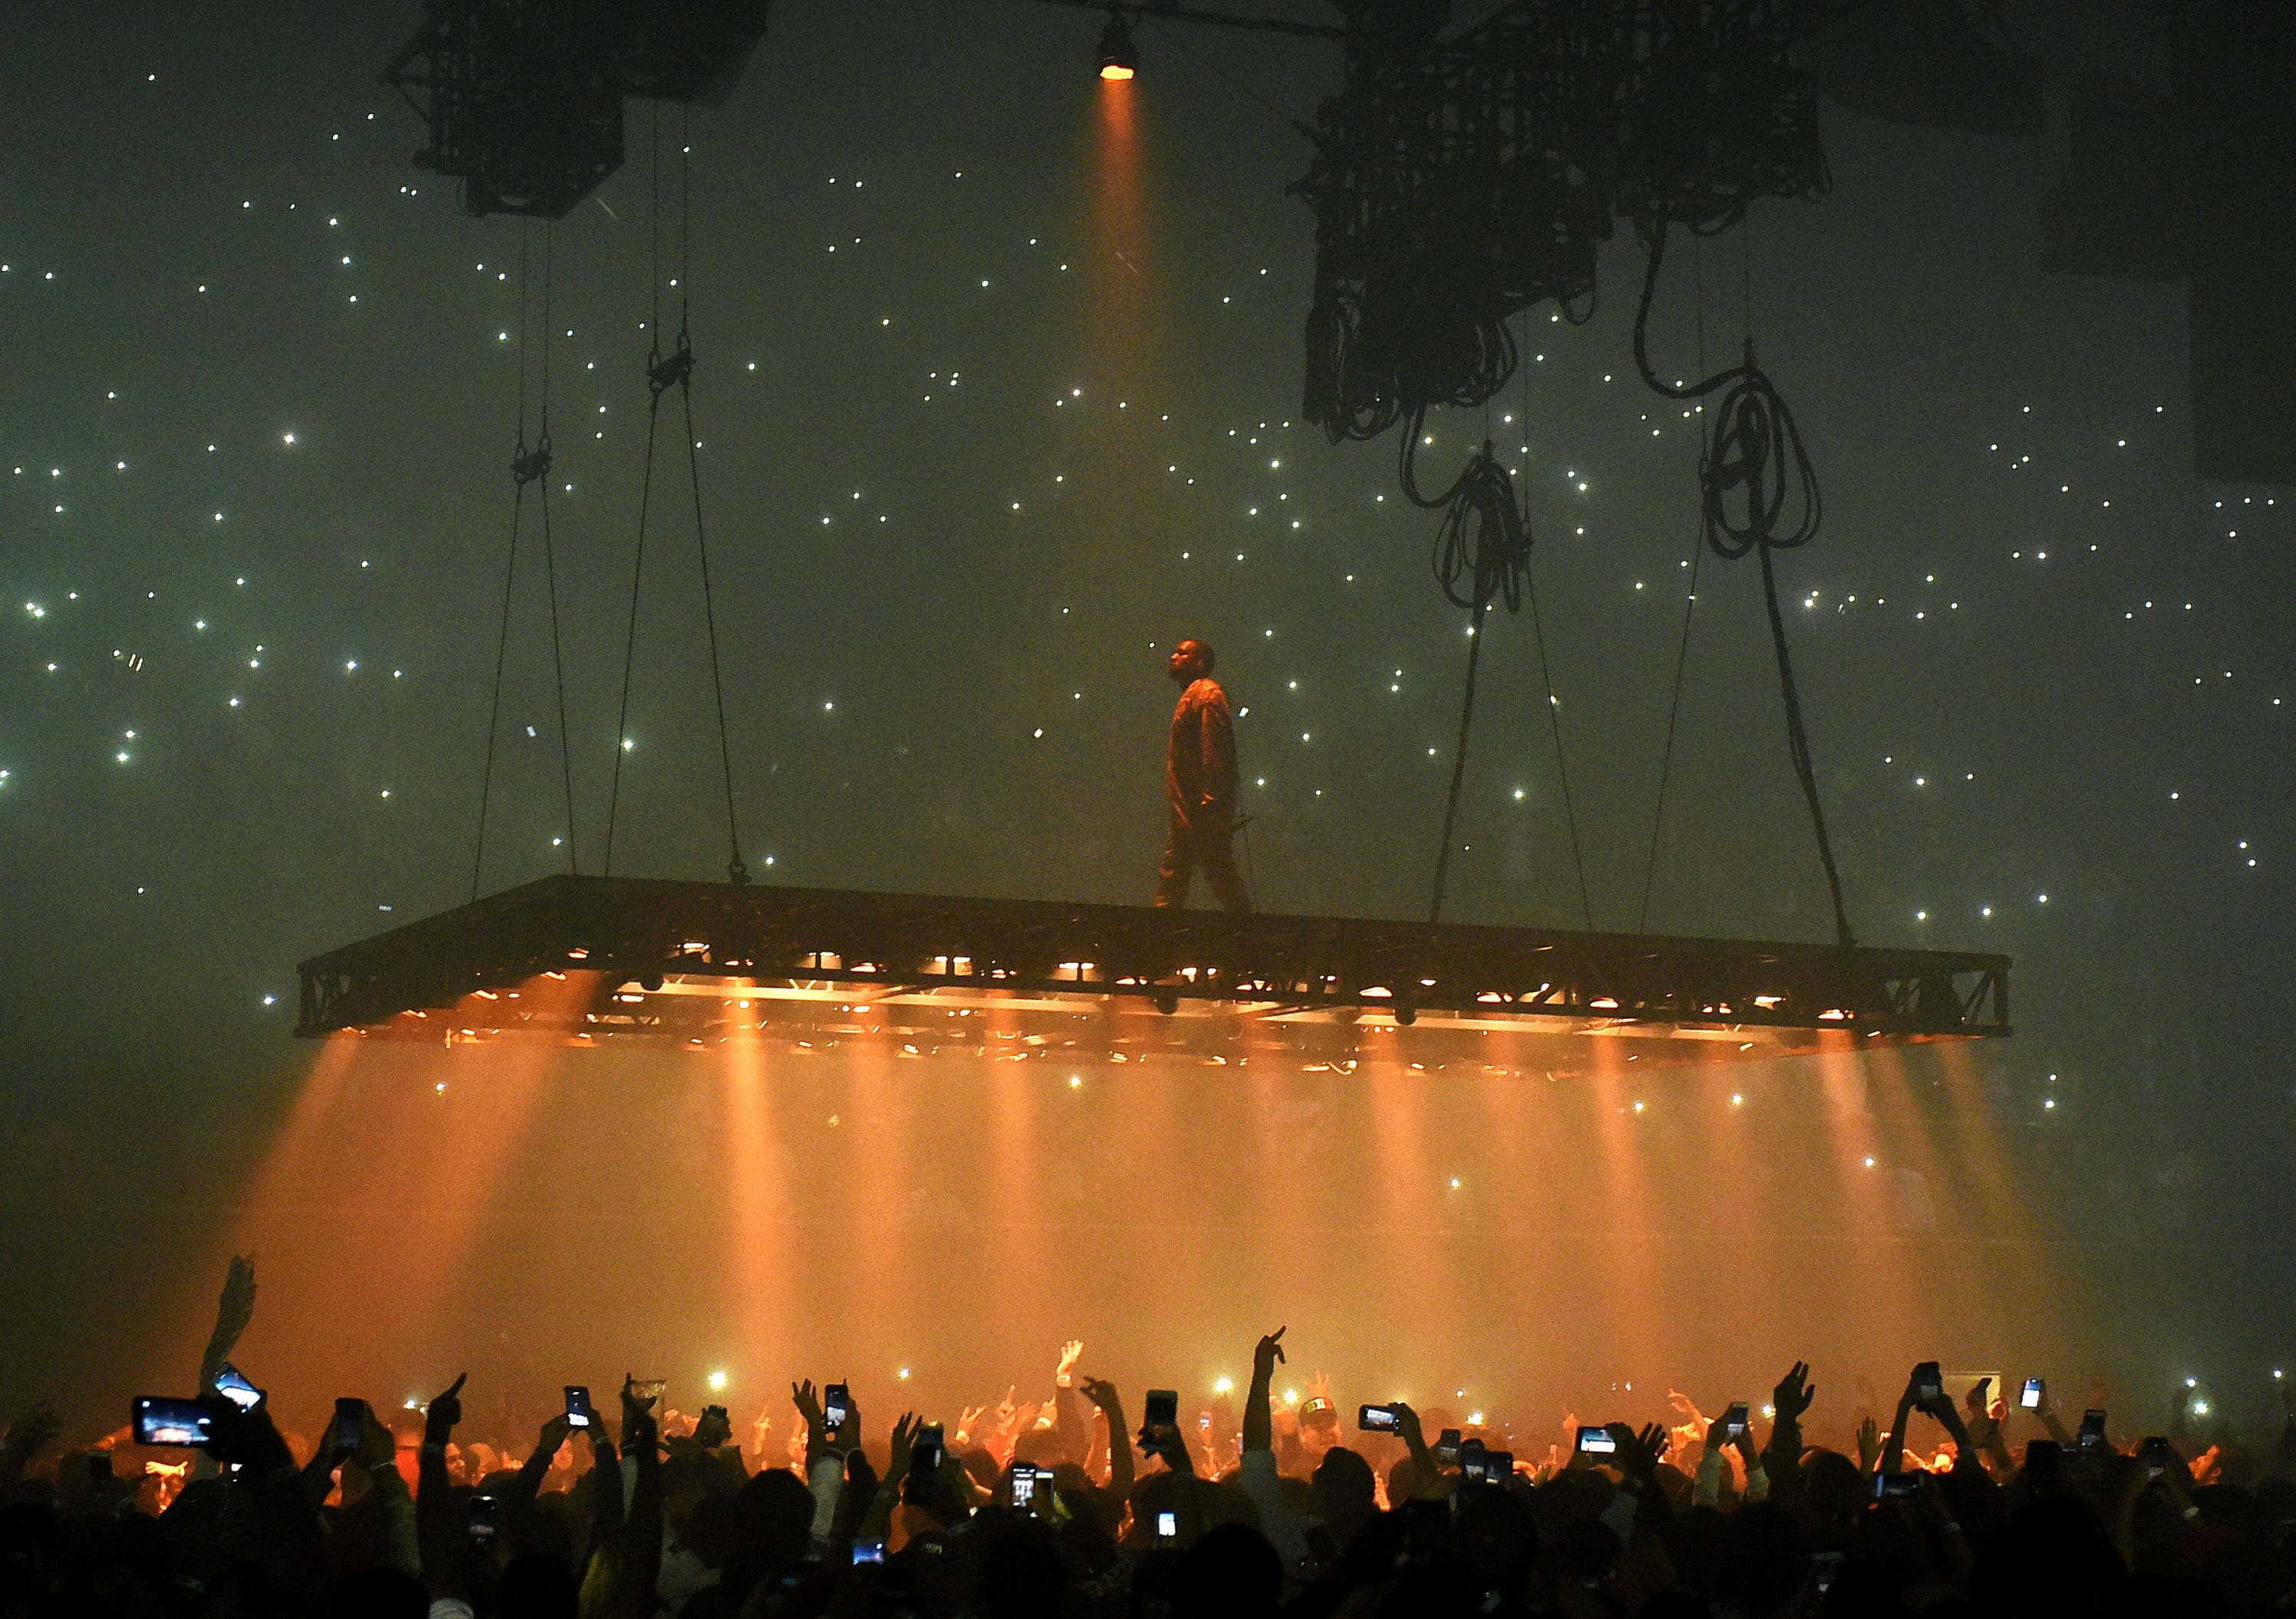 kanye performing at the forum in 2016